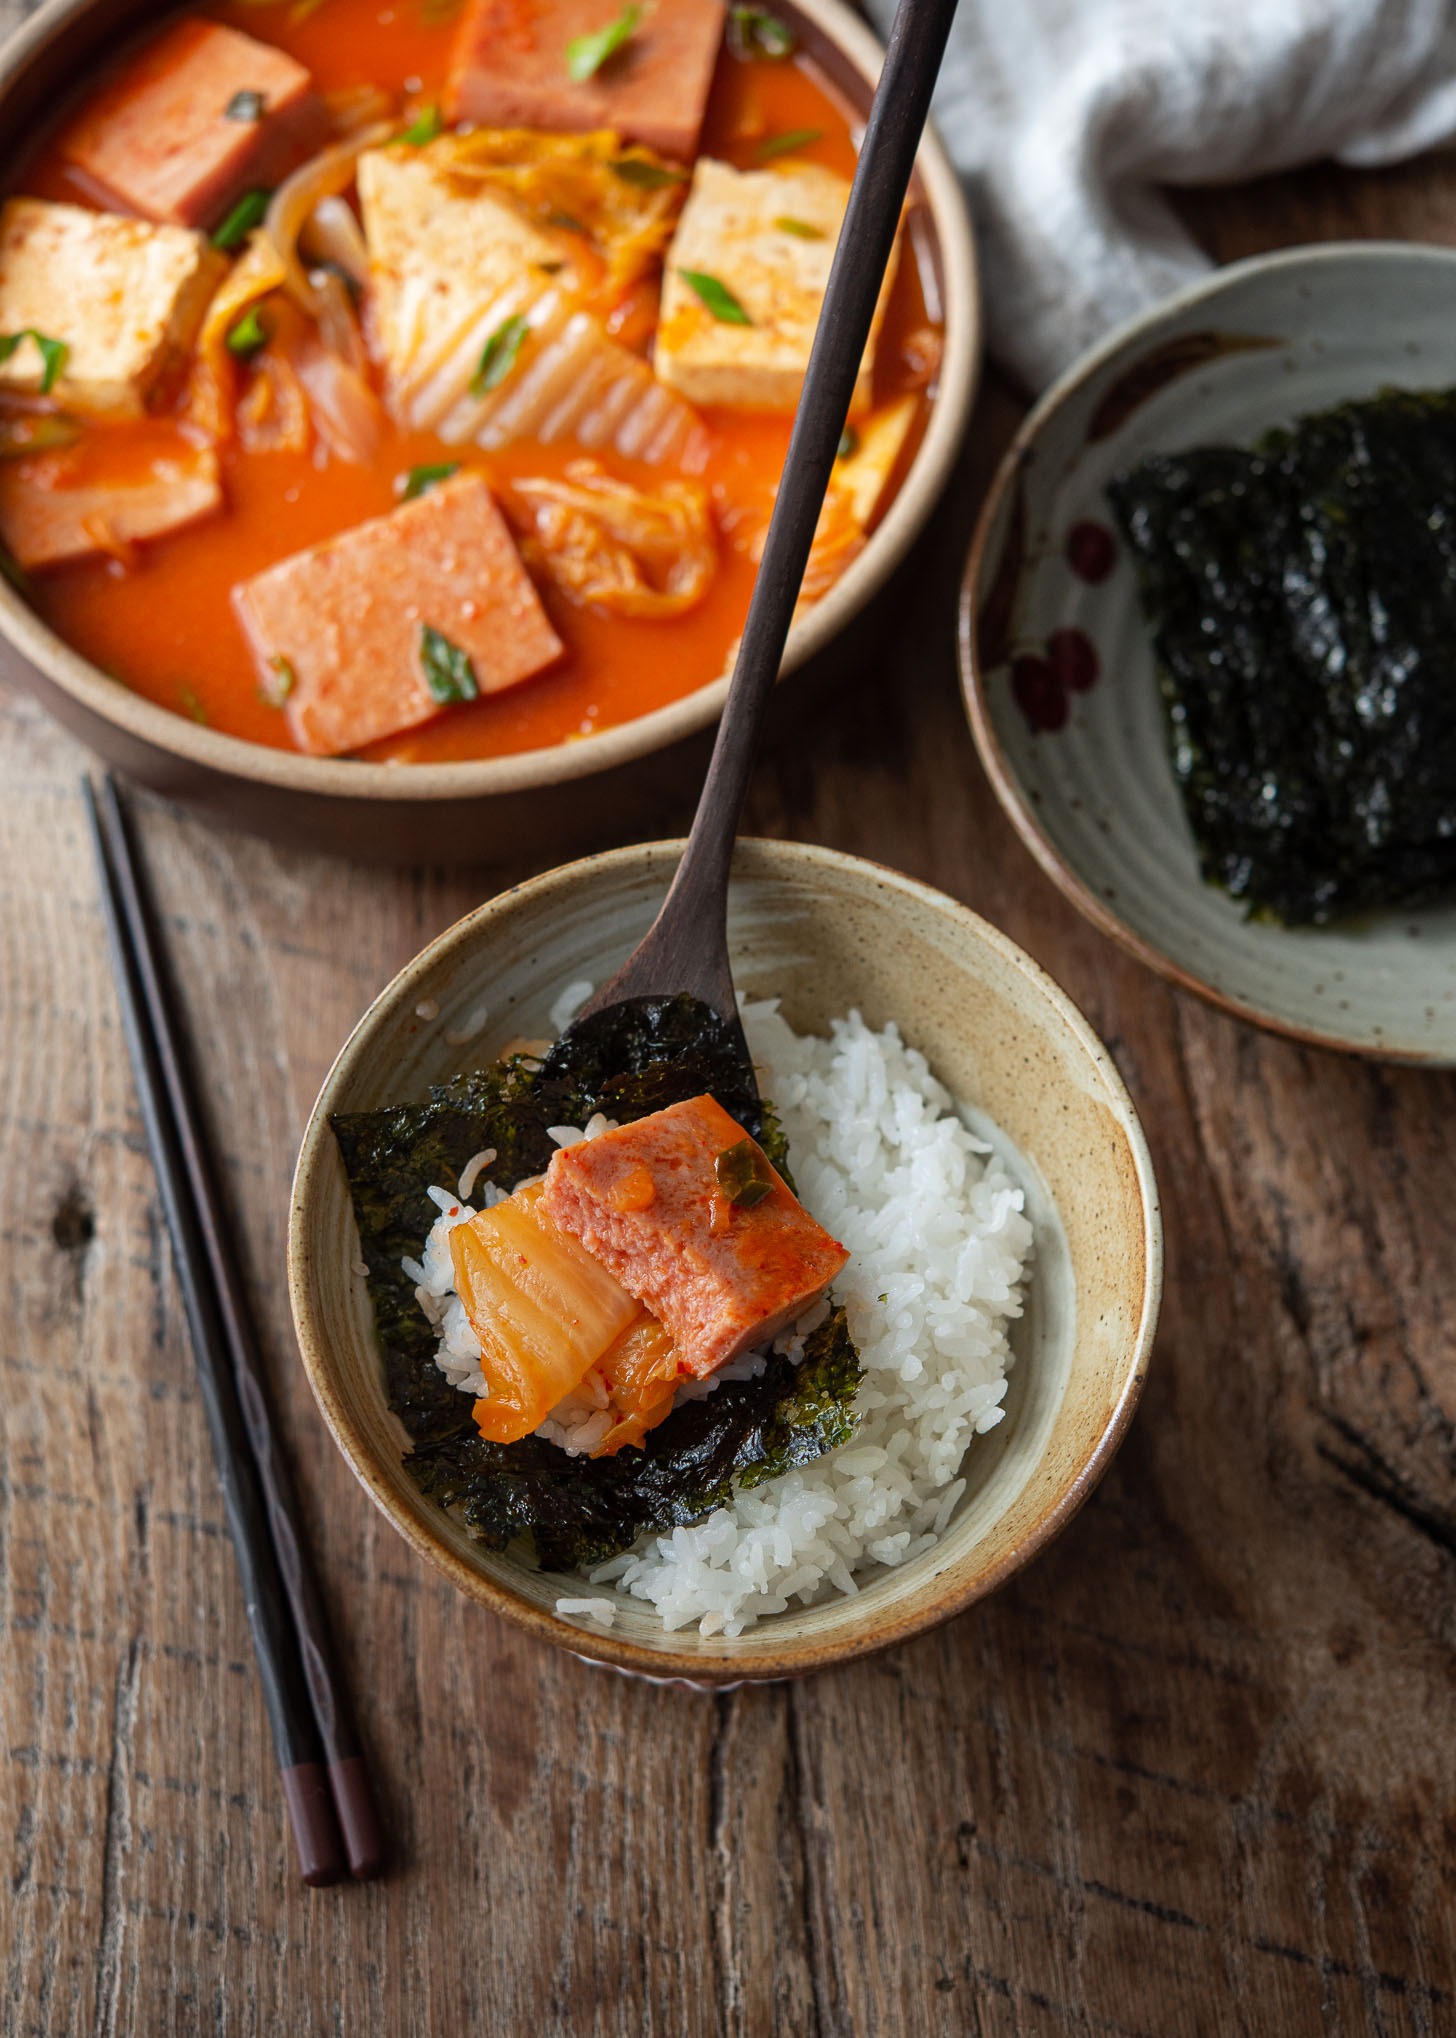 Spam kimchi jjigae wrapped with roasted seaweed and served over rice.